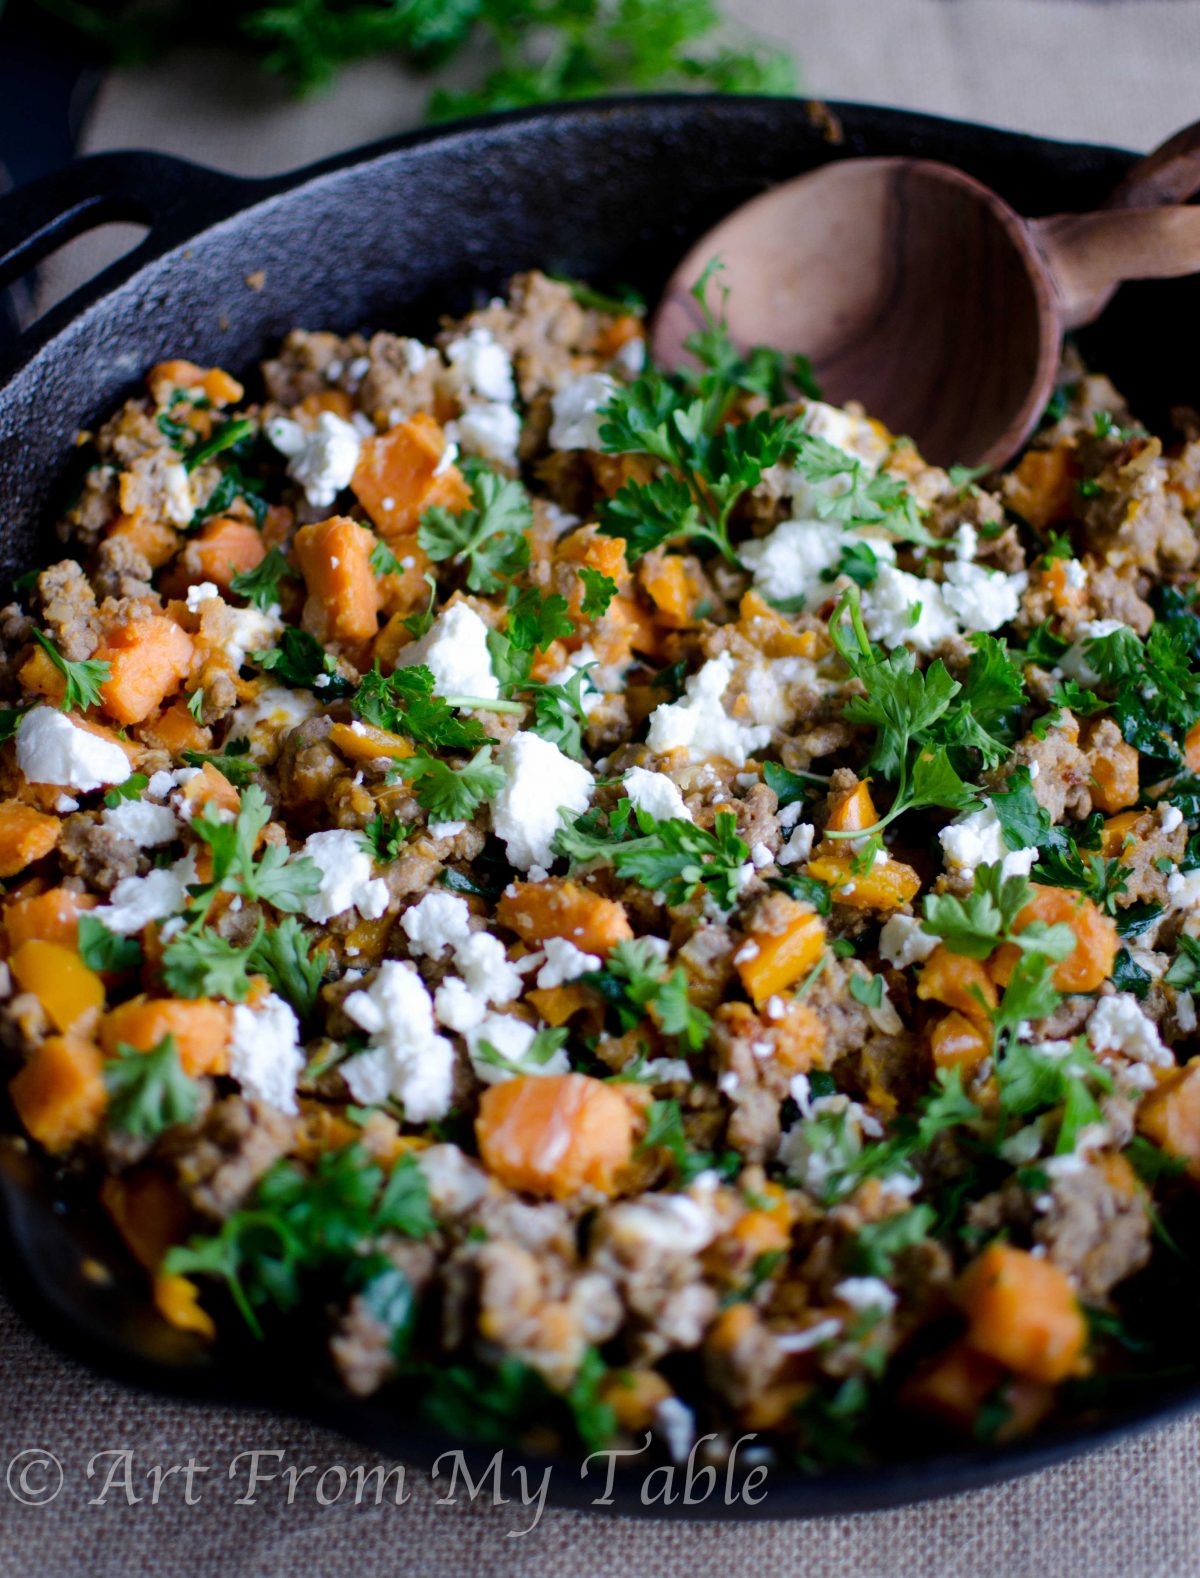 Turkey skillet dinner is a cast iron skillet full of ground turkey, kale, sweet potato chunks and goat cheese garnished with fresh parsley